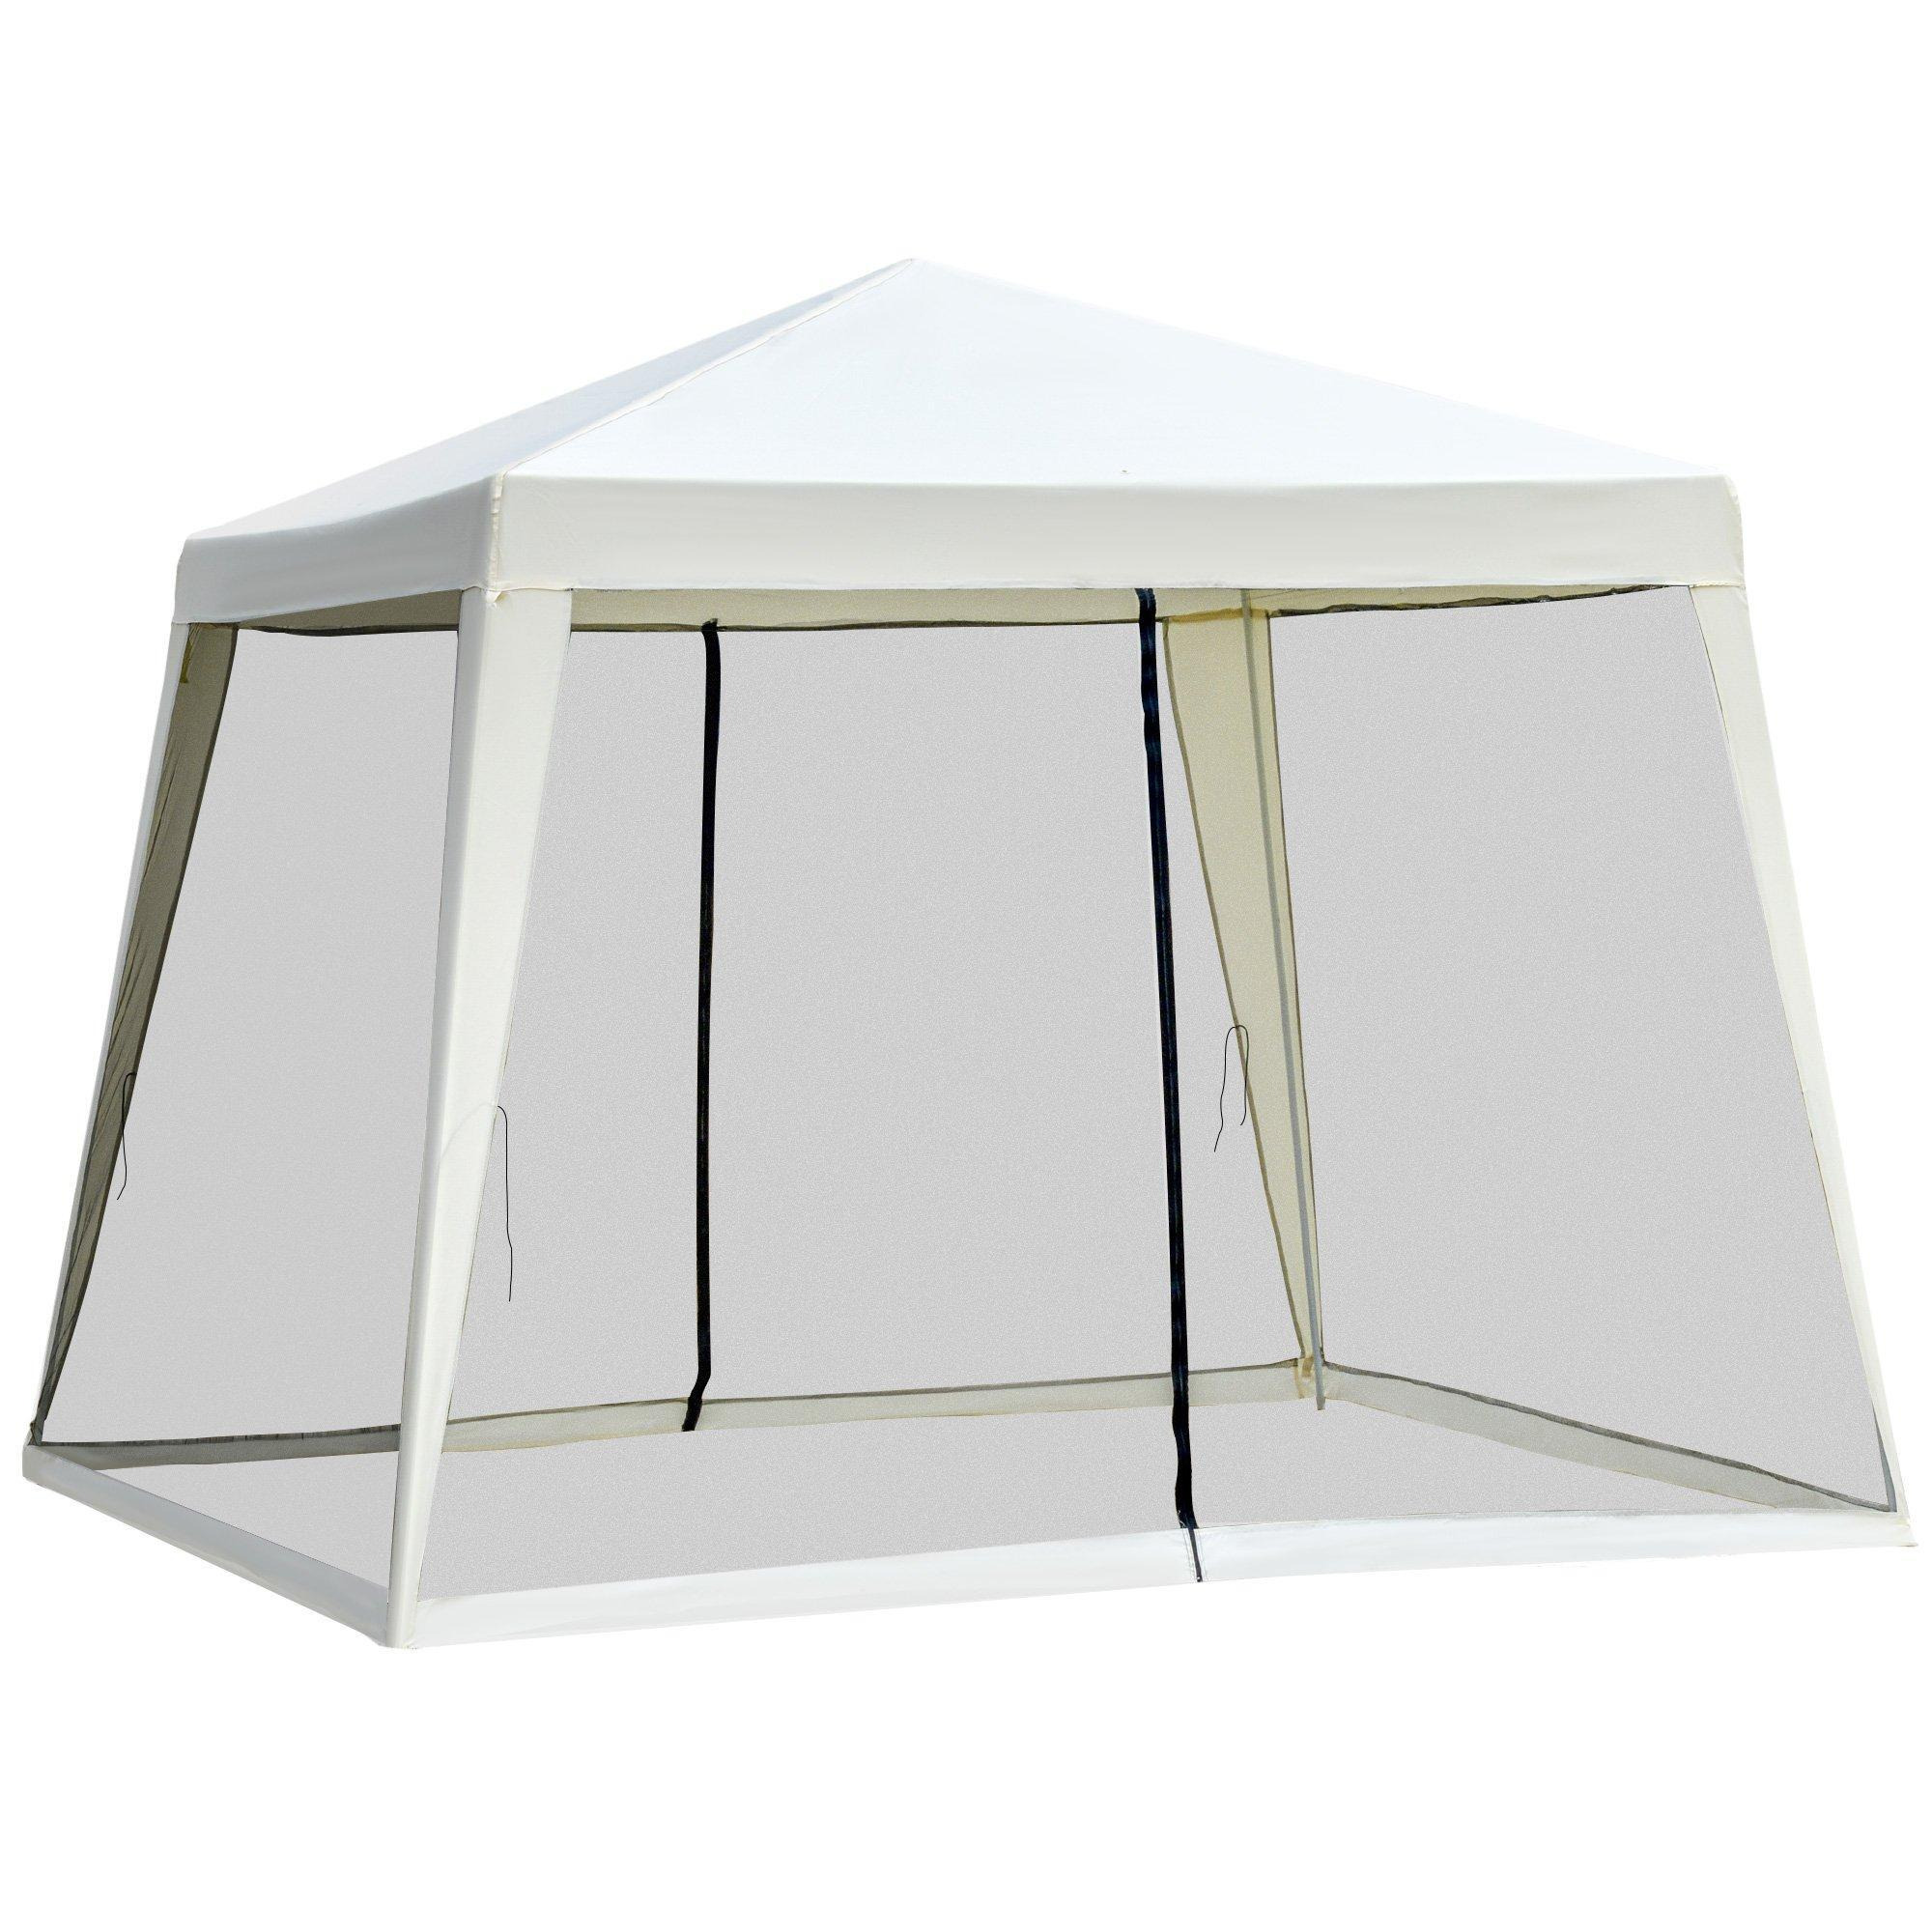 3x3m Outdoor Gazebo Canopy Tent Event Shelter with Mesh Screen Side - image 1